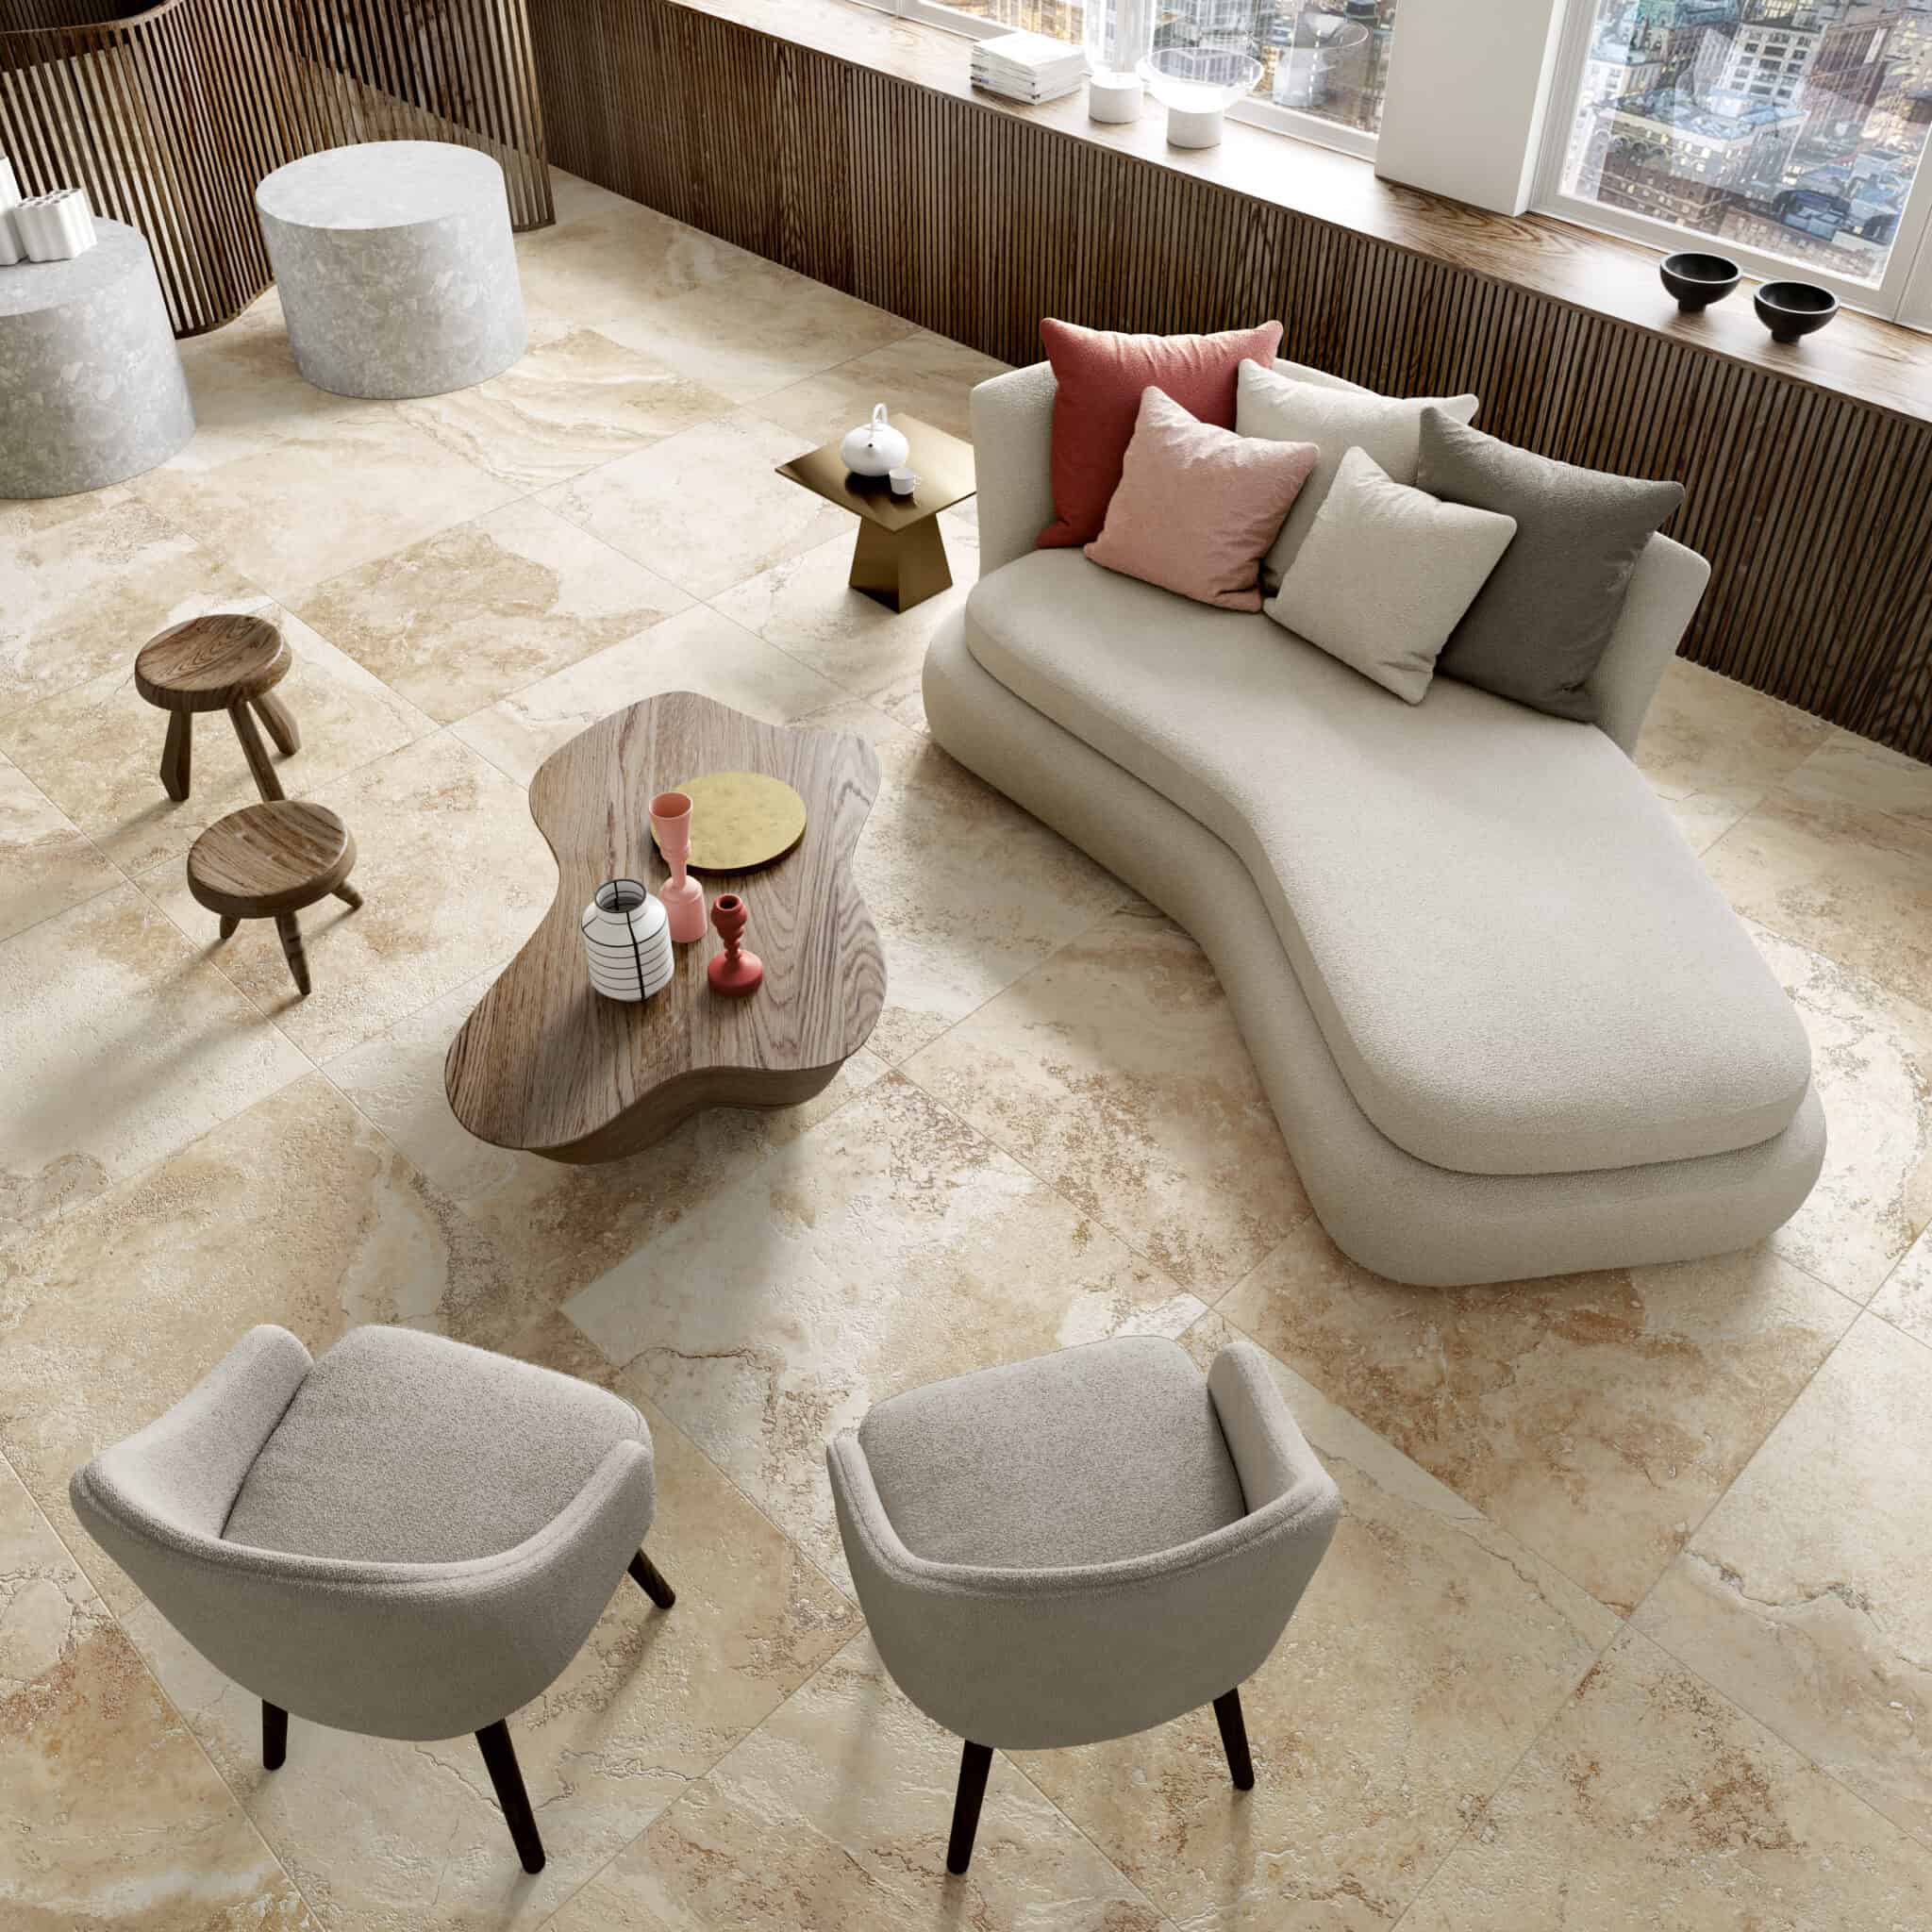 Porcelain Tile Natural Stone Look - BLOOM Collection-9393-f34598873117